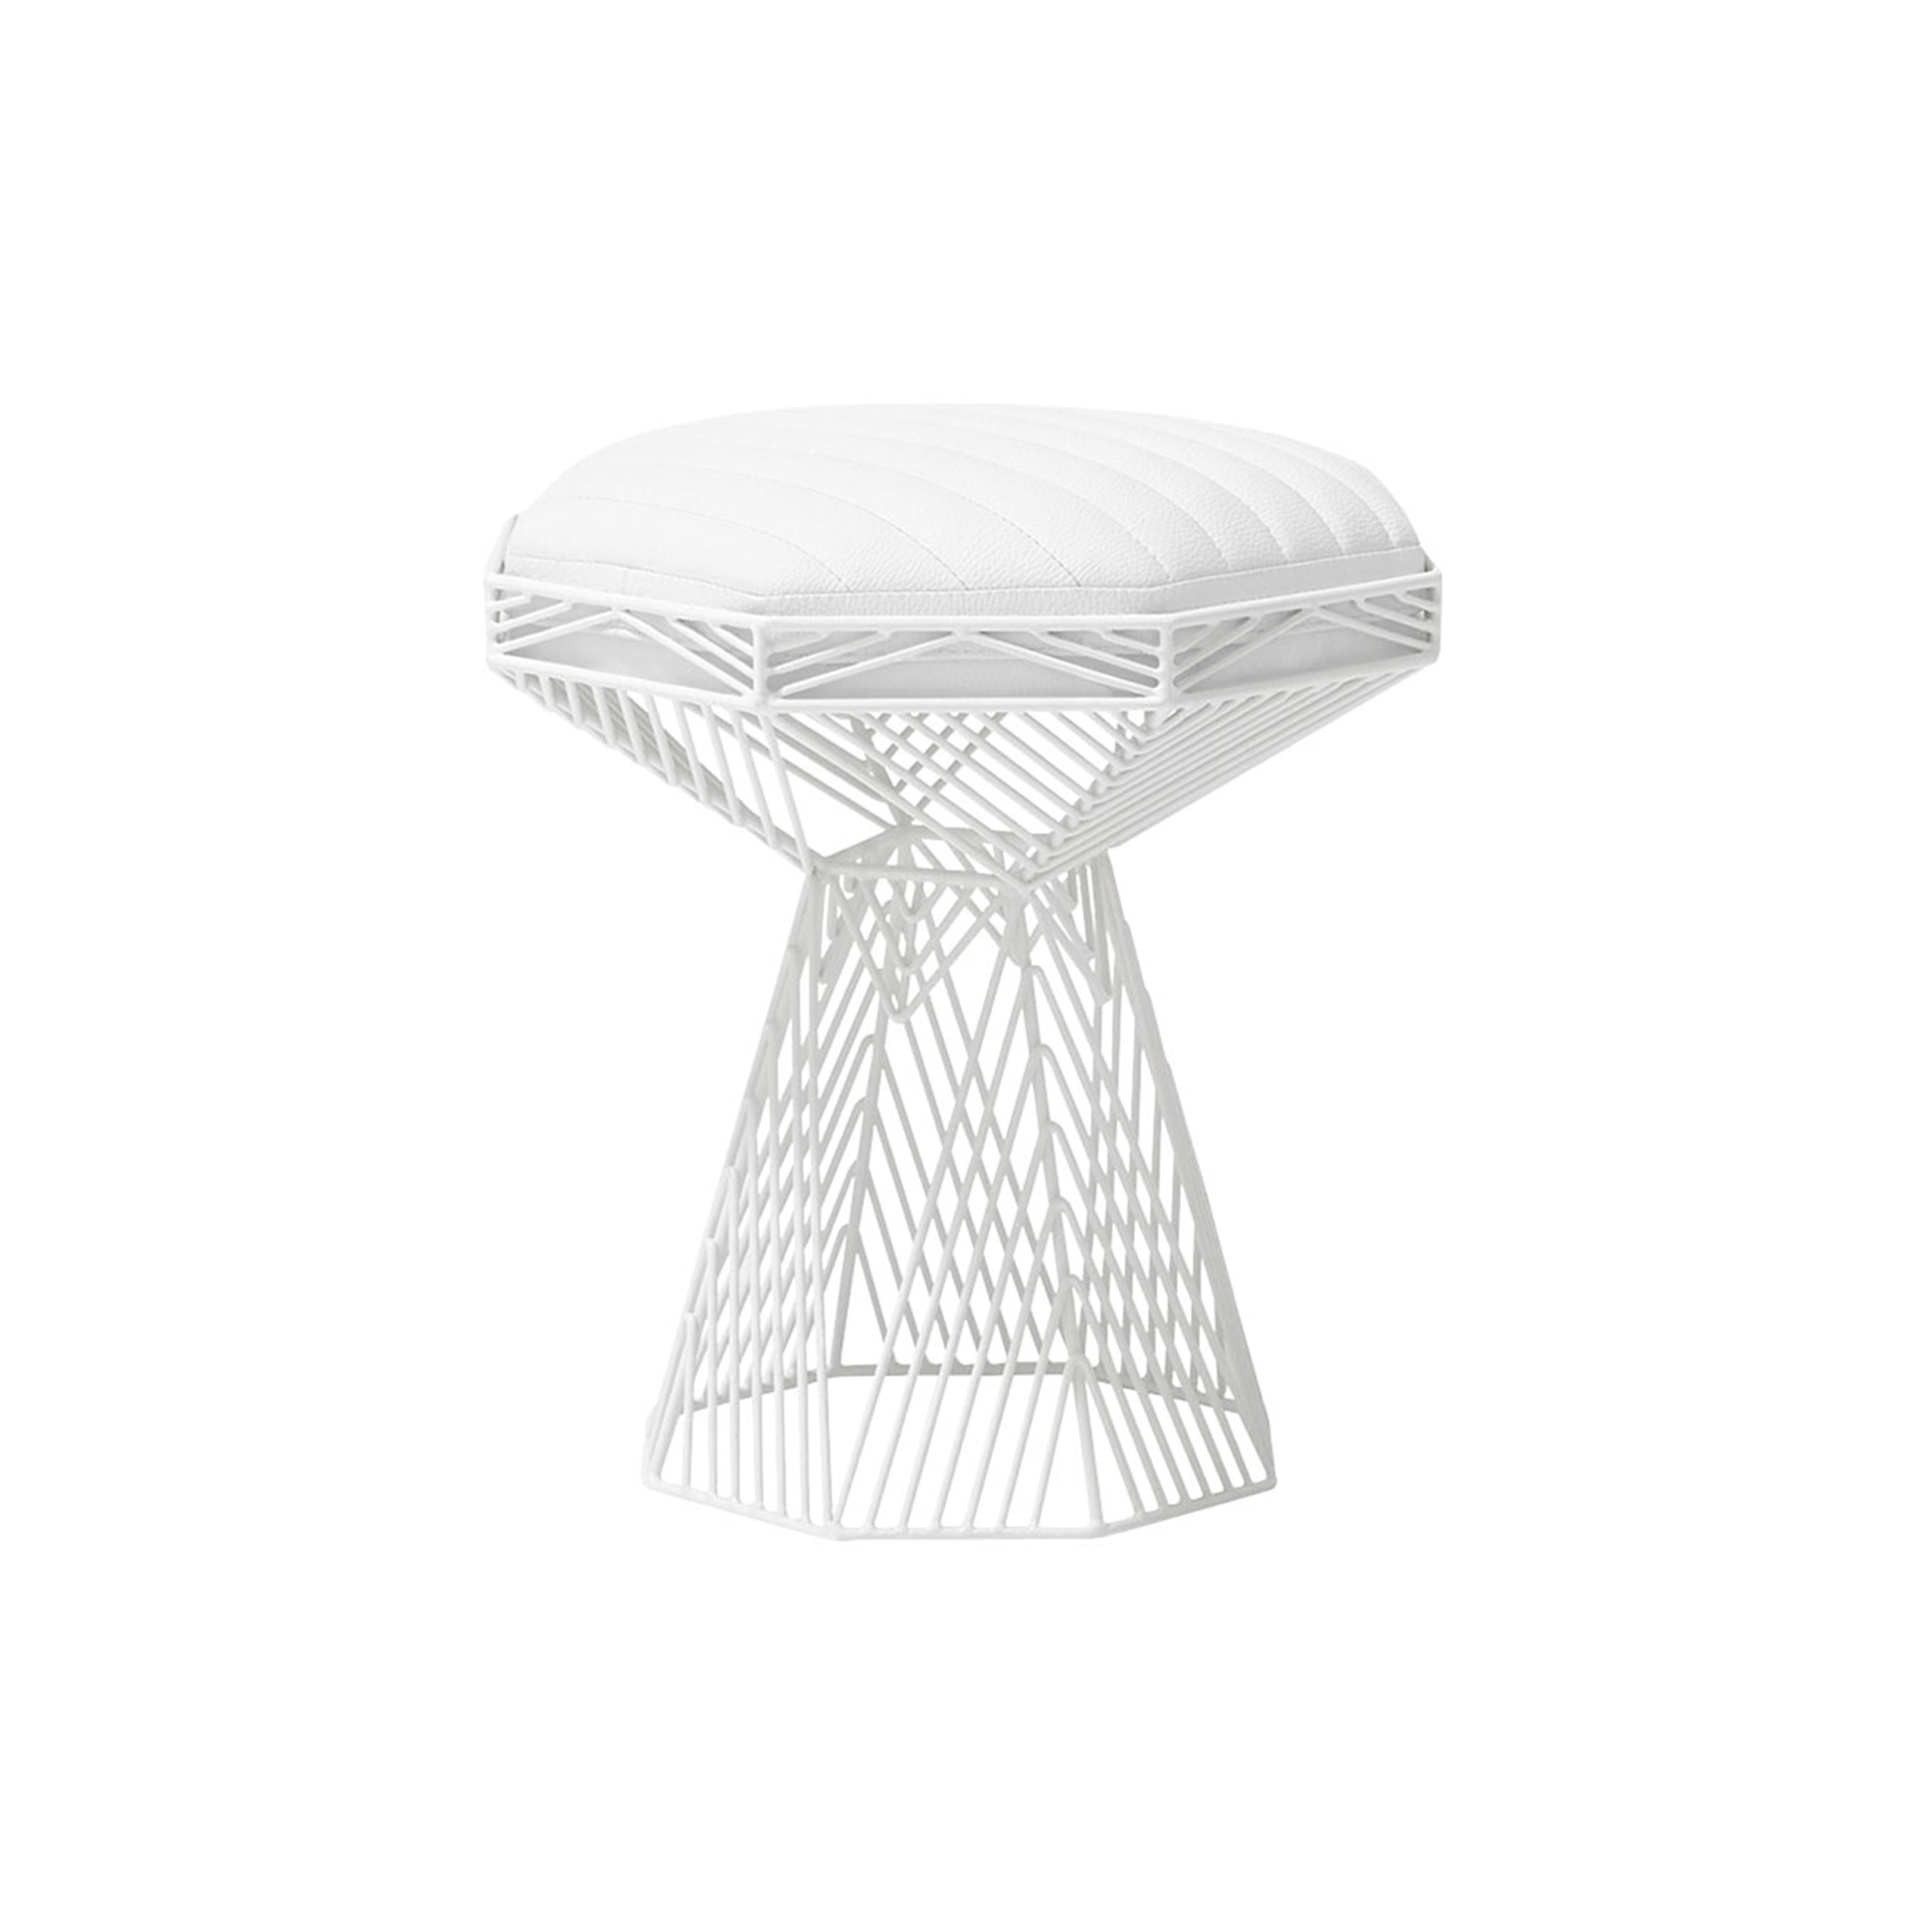 Switch Table/Stool: Color + White + White